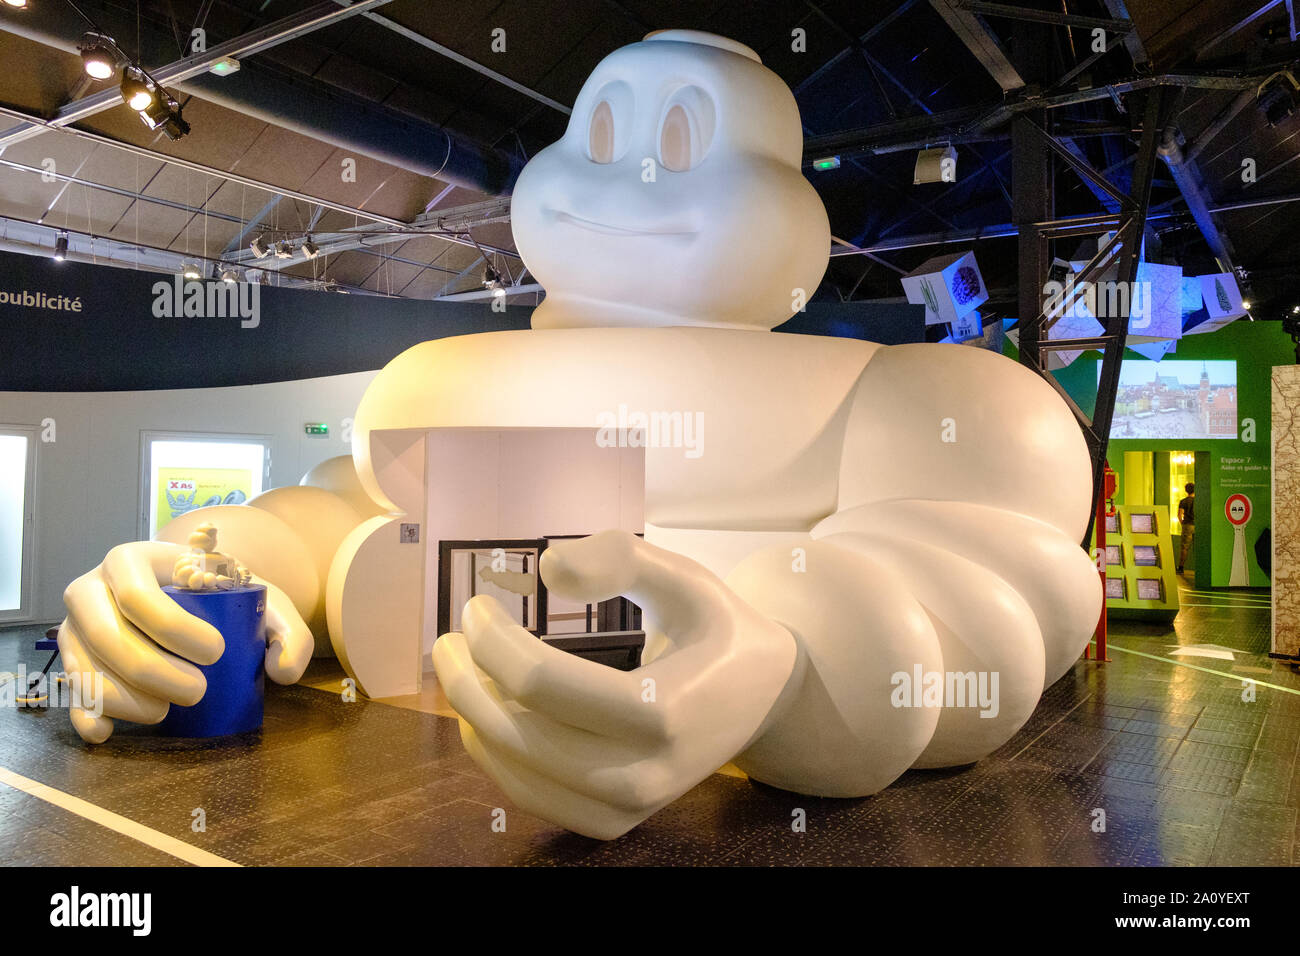 Huge Michelin Tyre Man (bibendum) forming entrance to first floor of L'Aventure Michelin museum in Clermont Ferrand, France Stock Photo